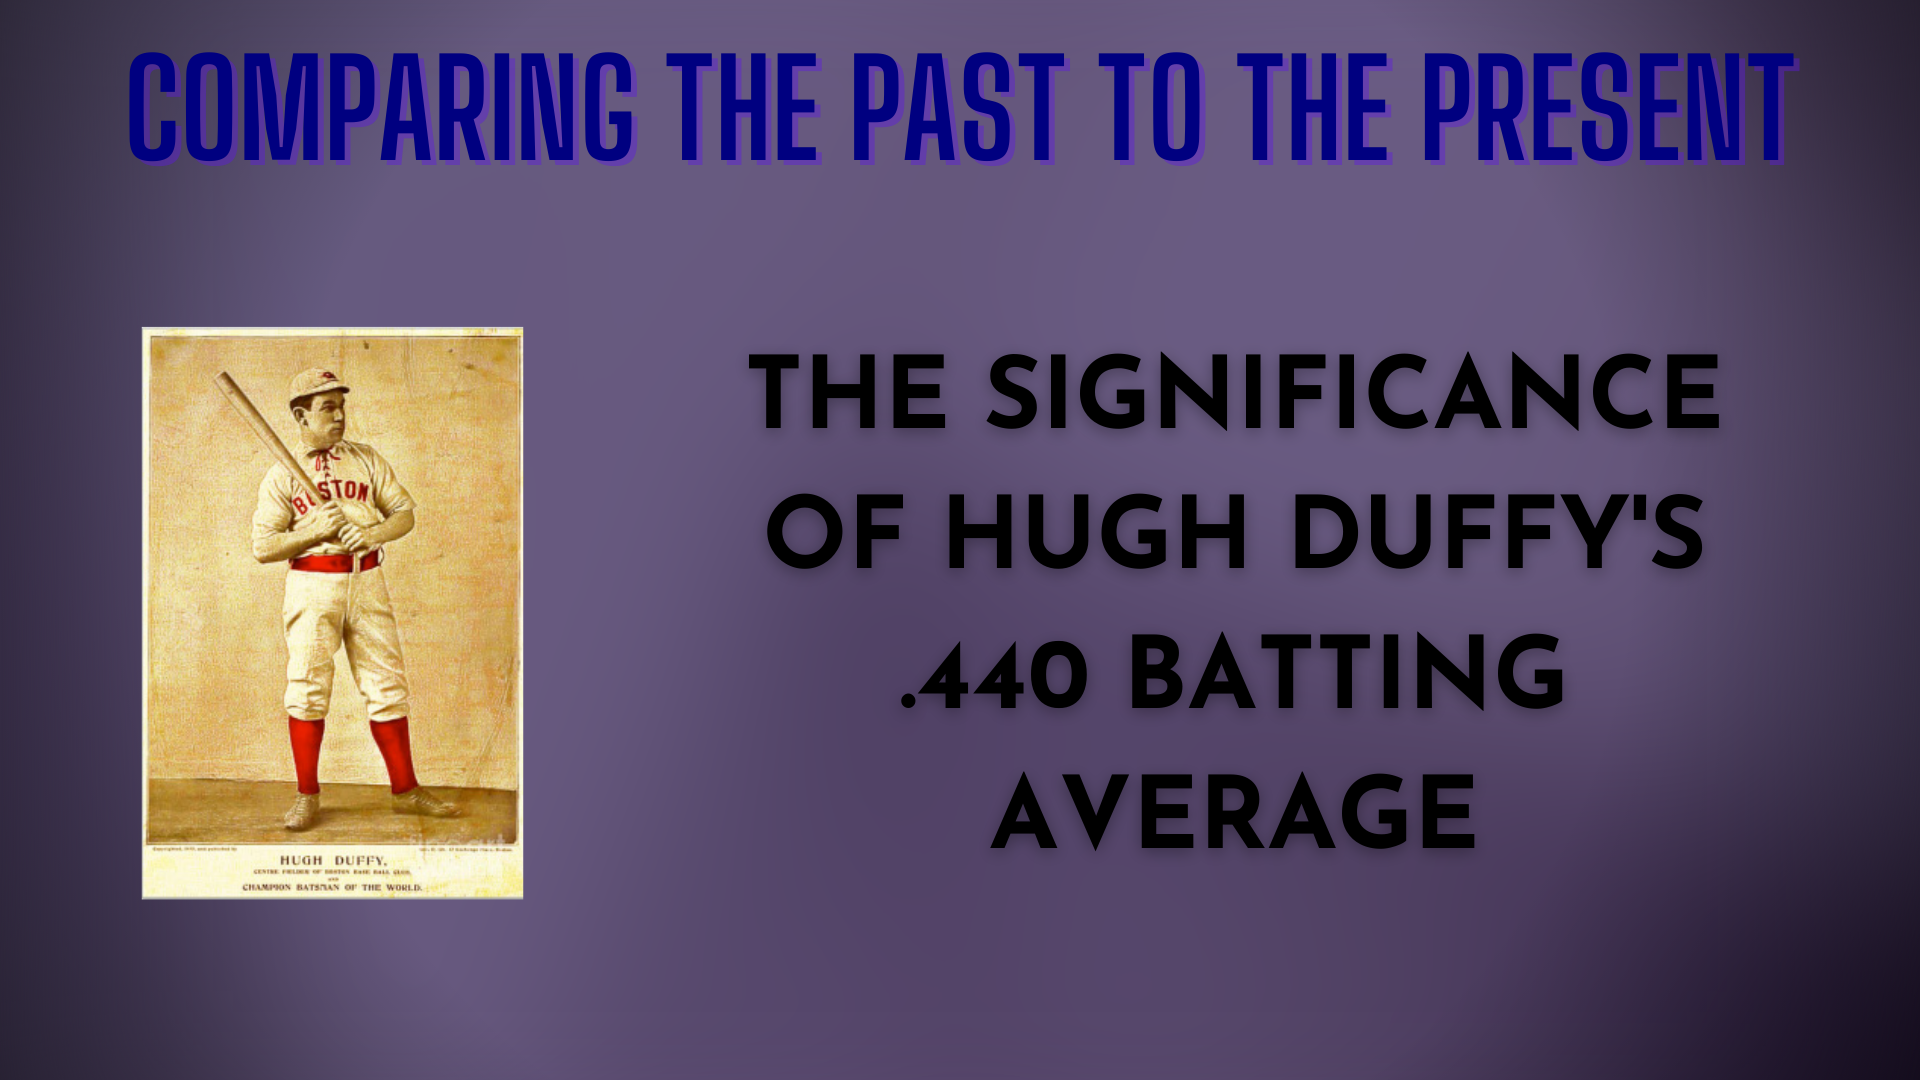 How Different Would Hugh Duffy’s 1894 Batting Title Look in 2020? – MLB Stat Inflation